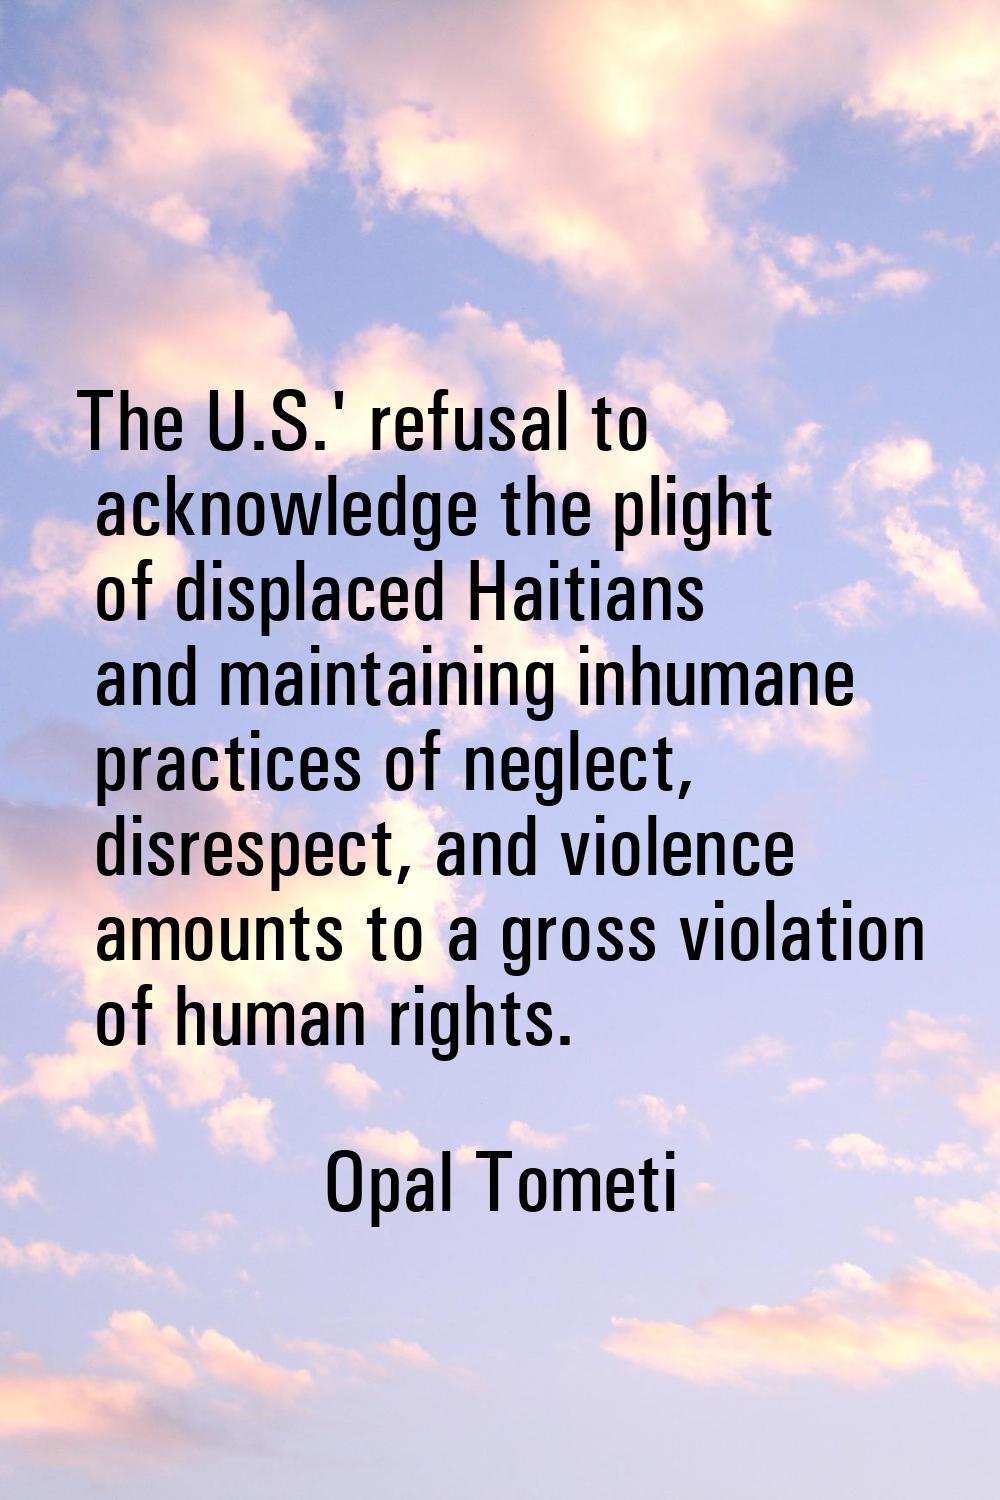 The U.S.' refusal to acknowledge the plight of displaced Haitians and maintaining inhumane practice